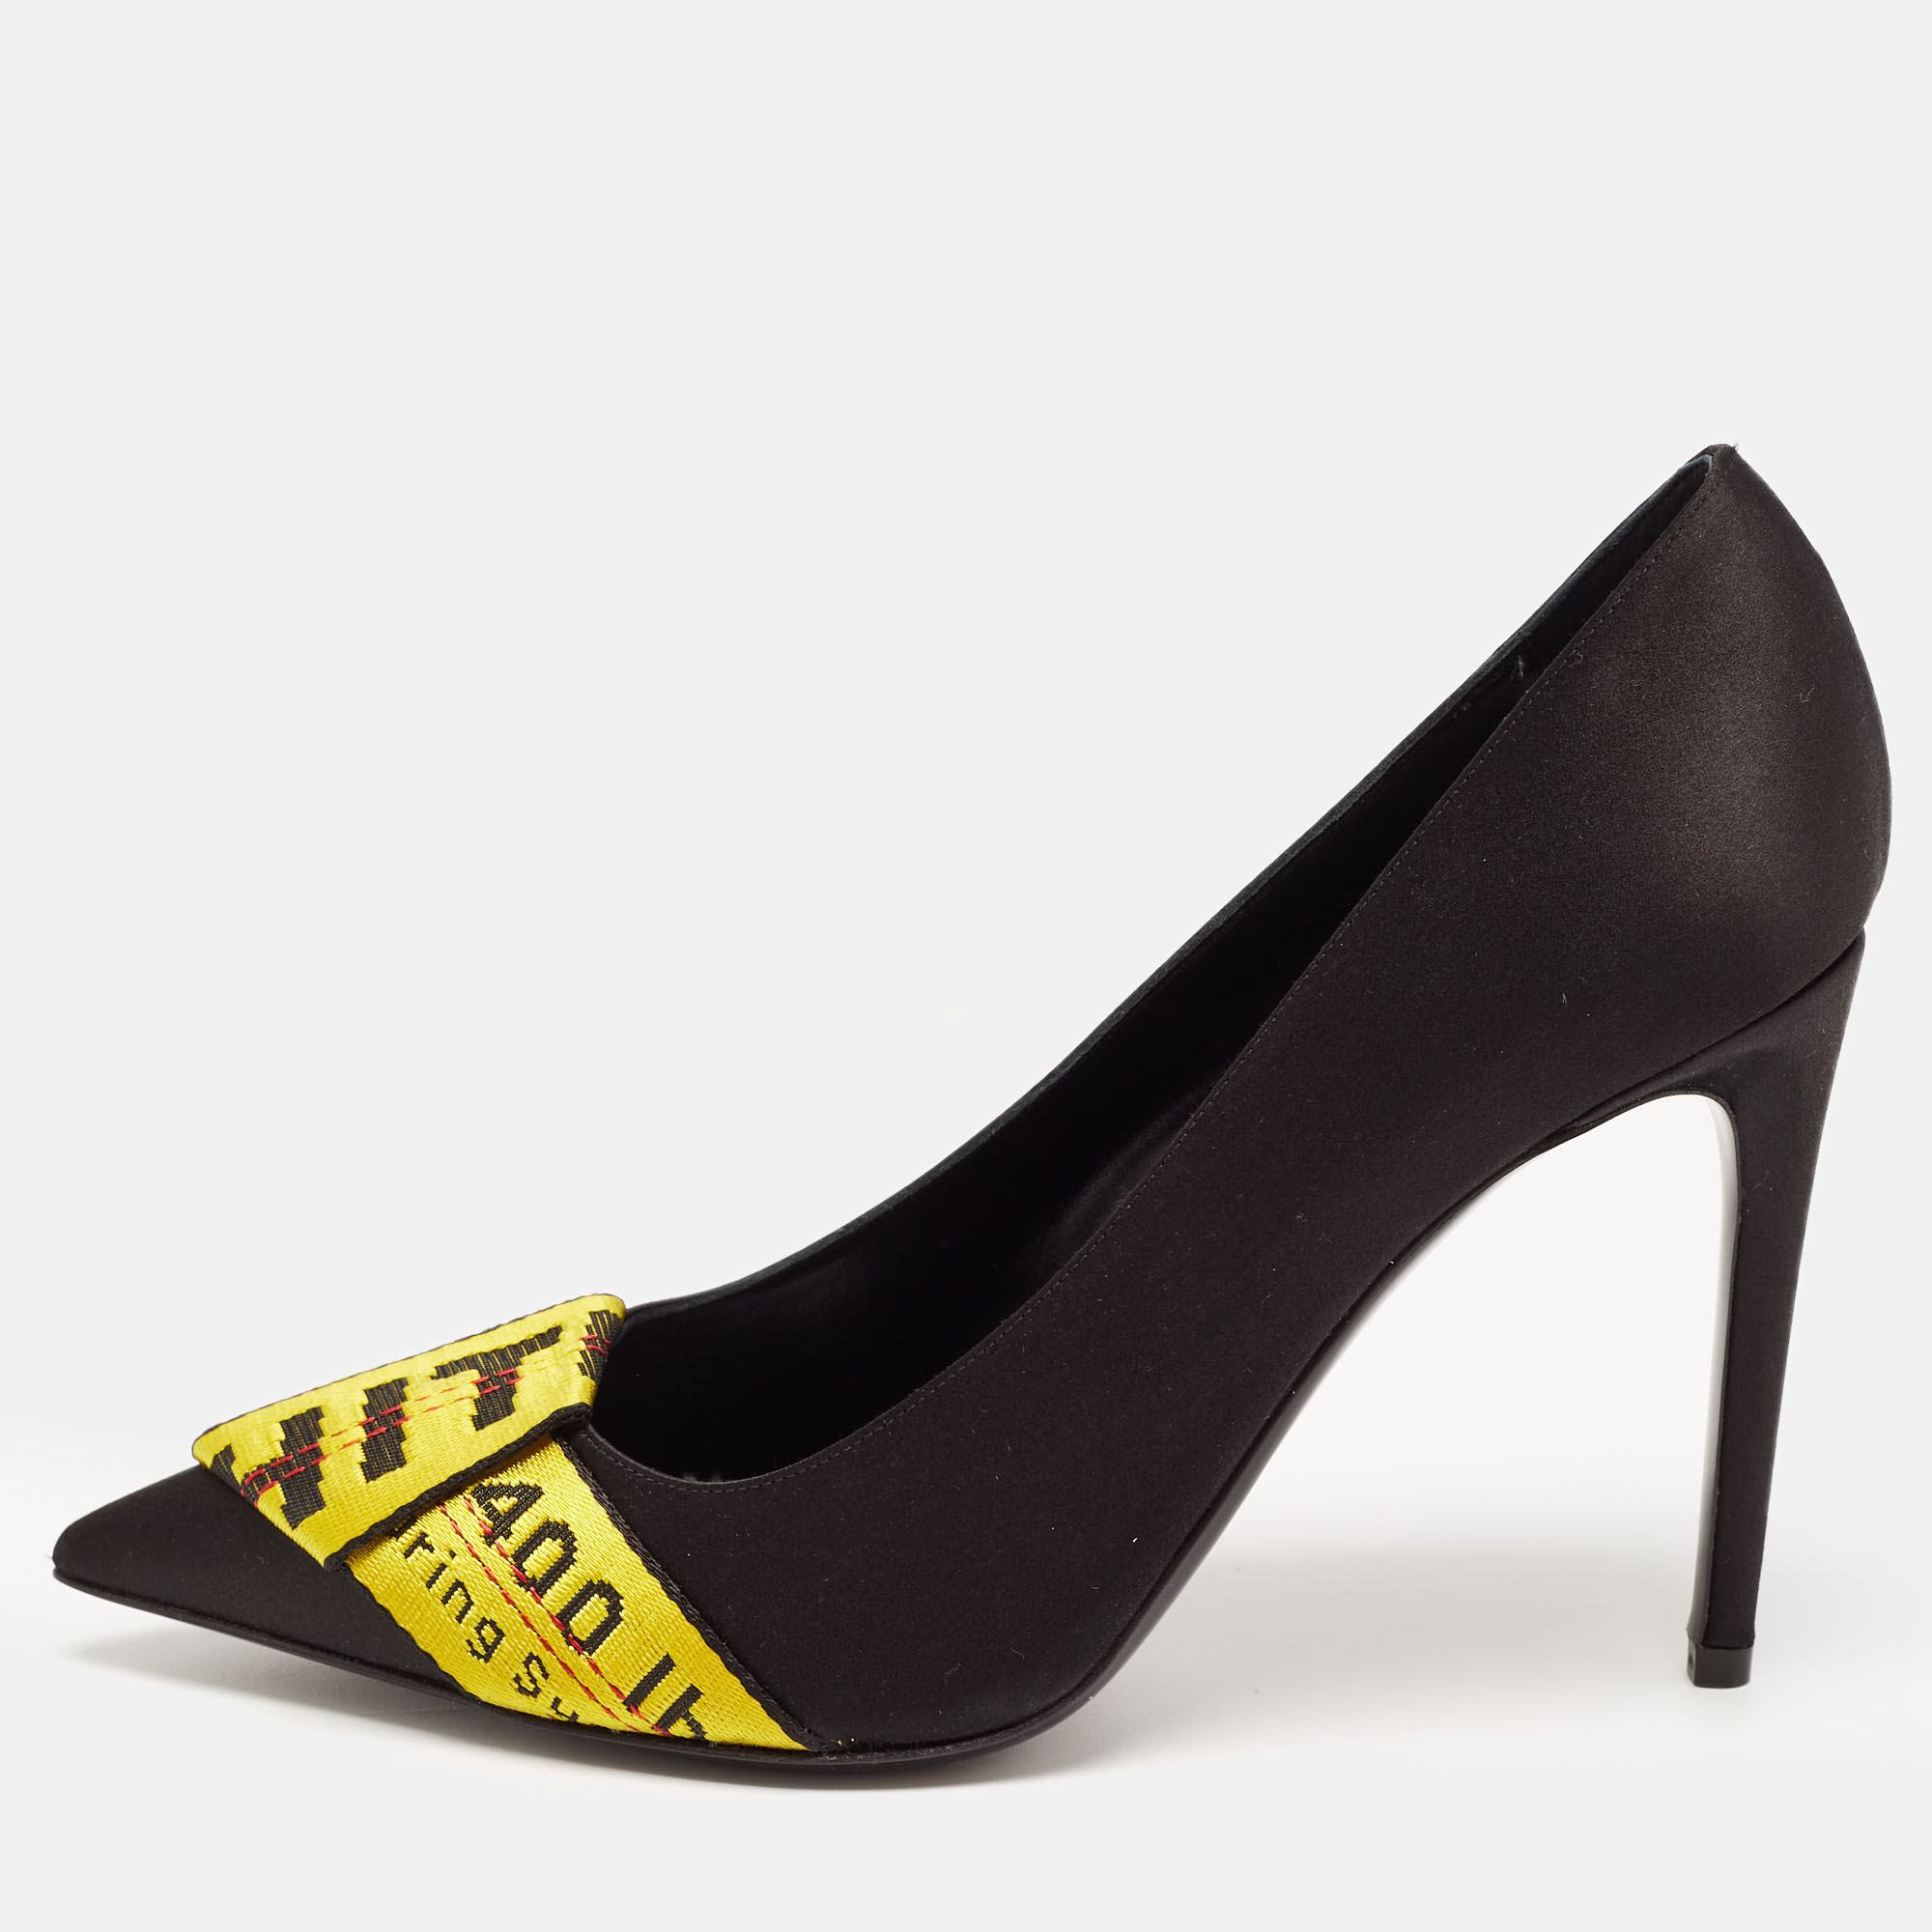 Off-white black/yellow satin and logo canvas pumps size 40